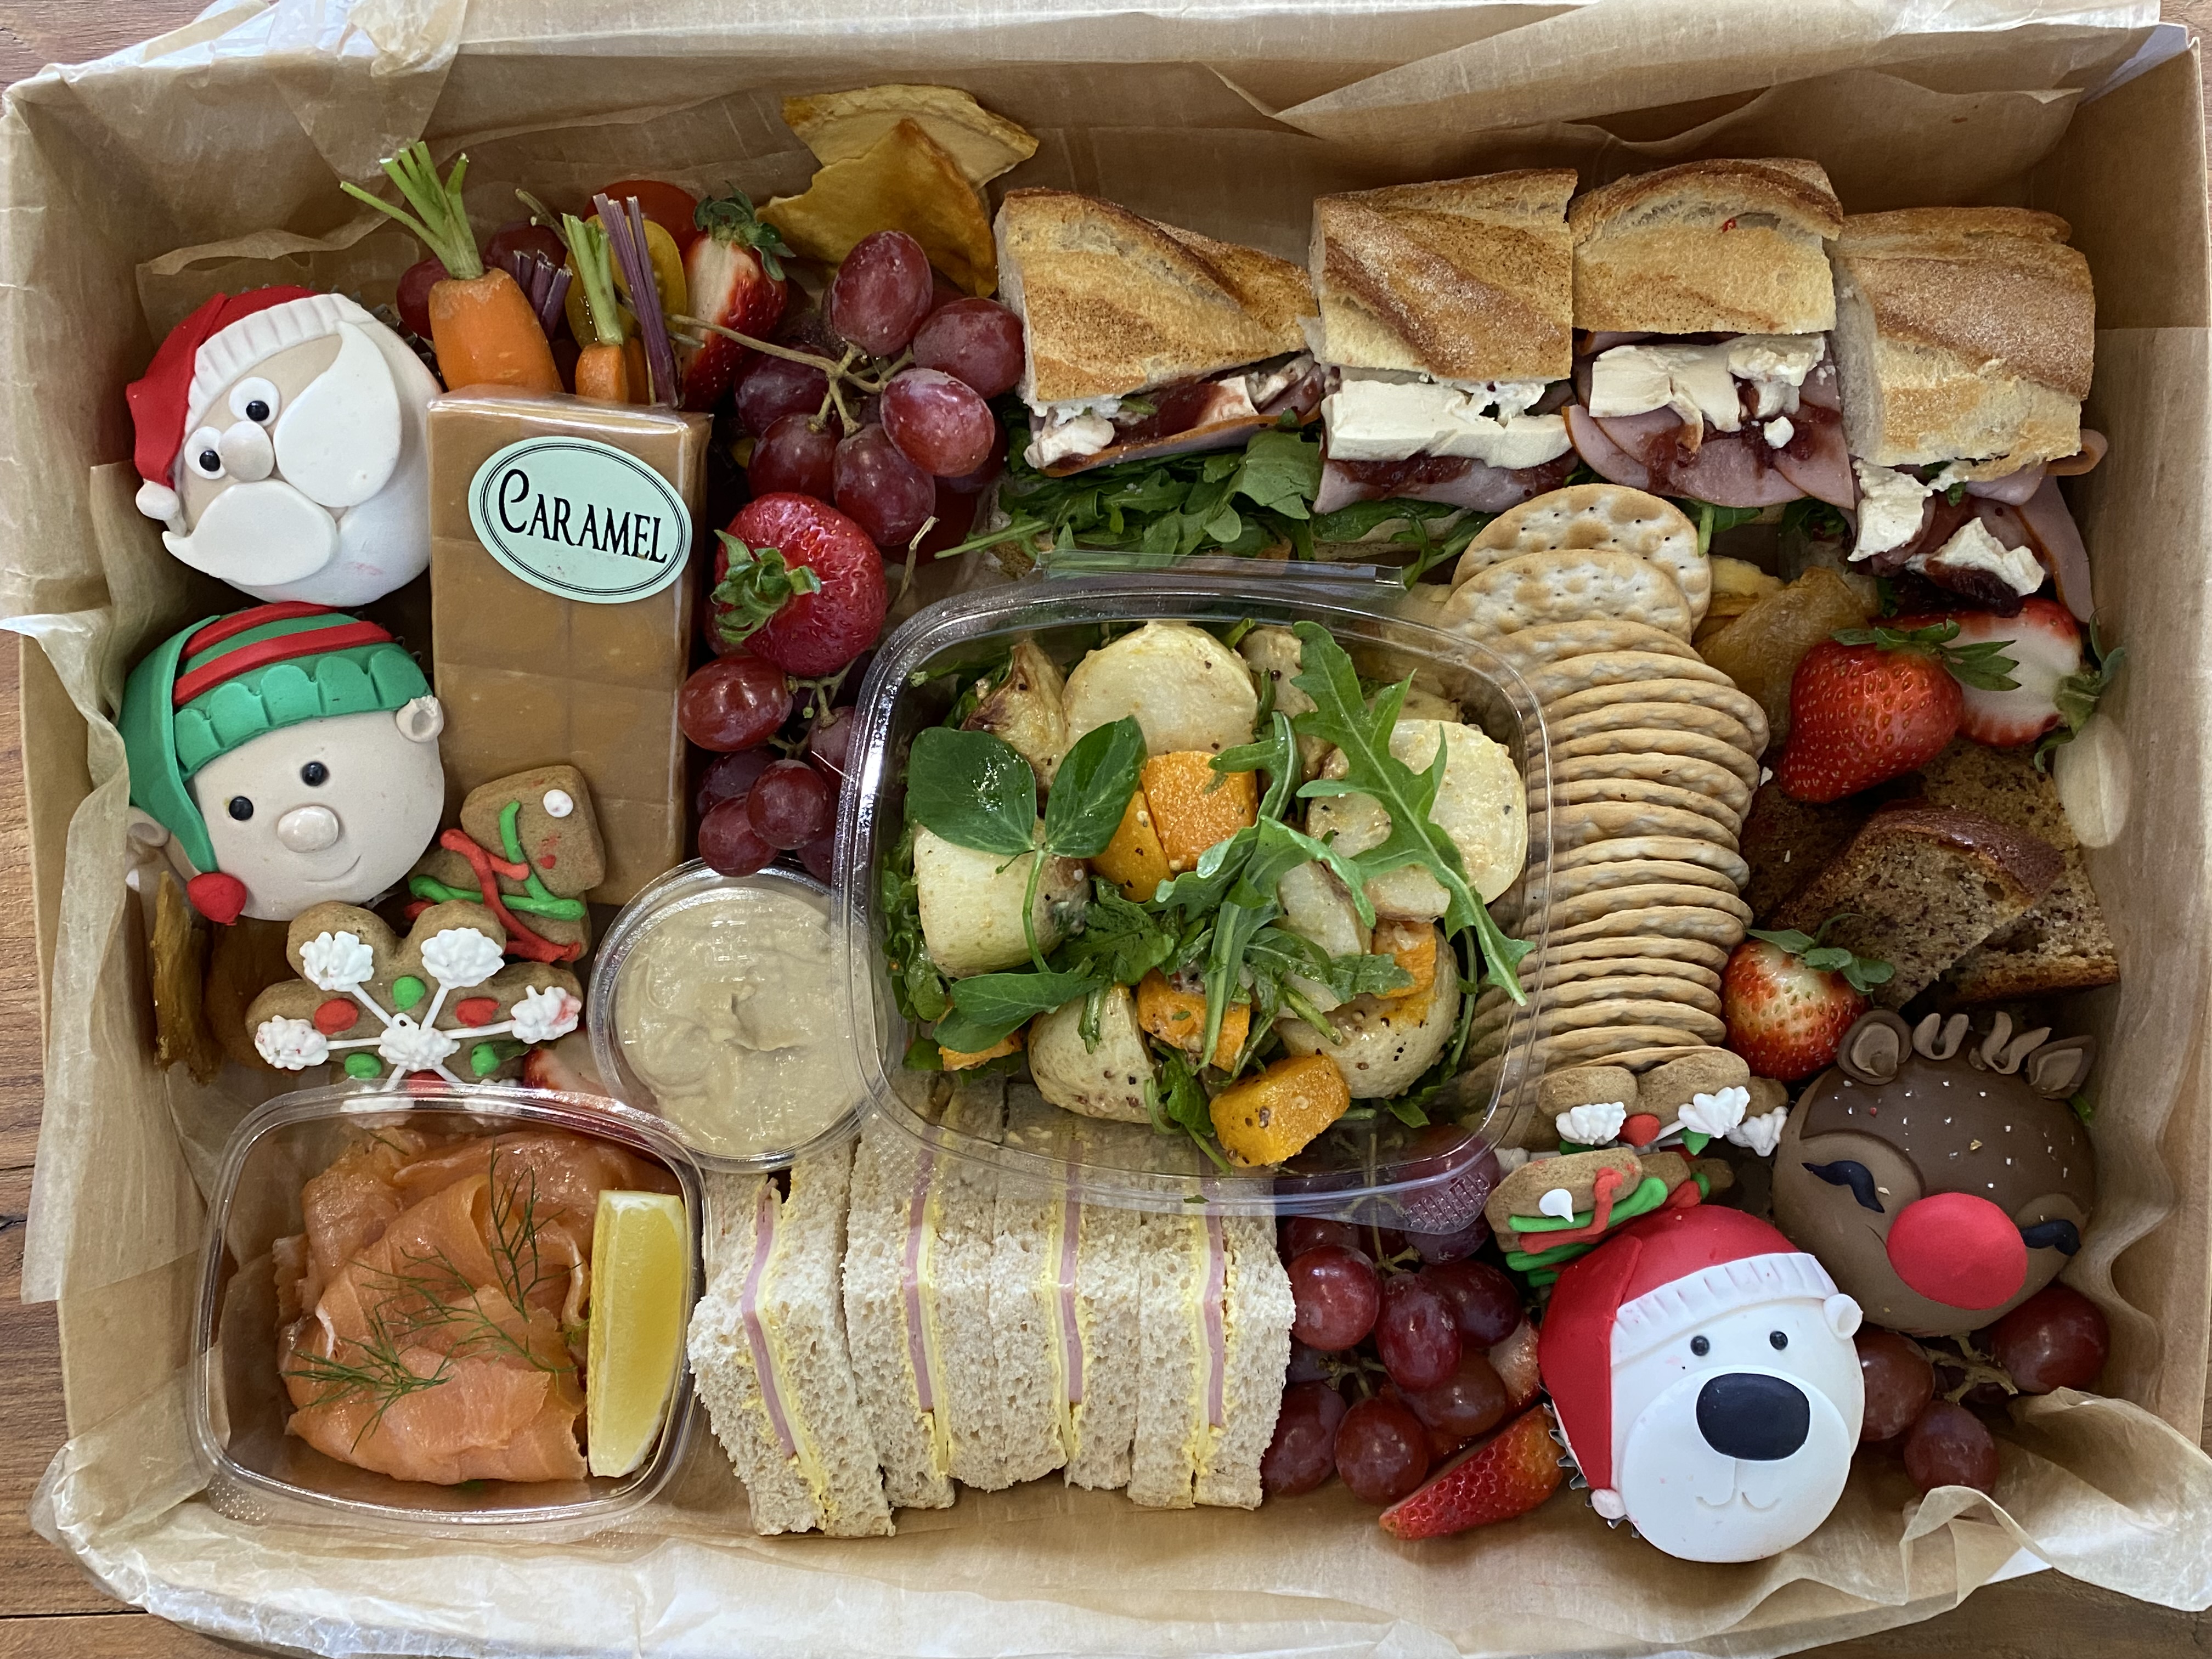 A hamper of Christmas-themed food